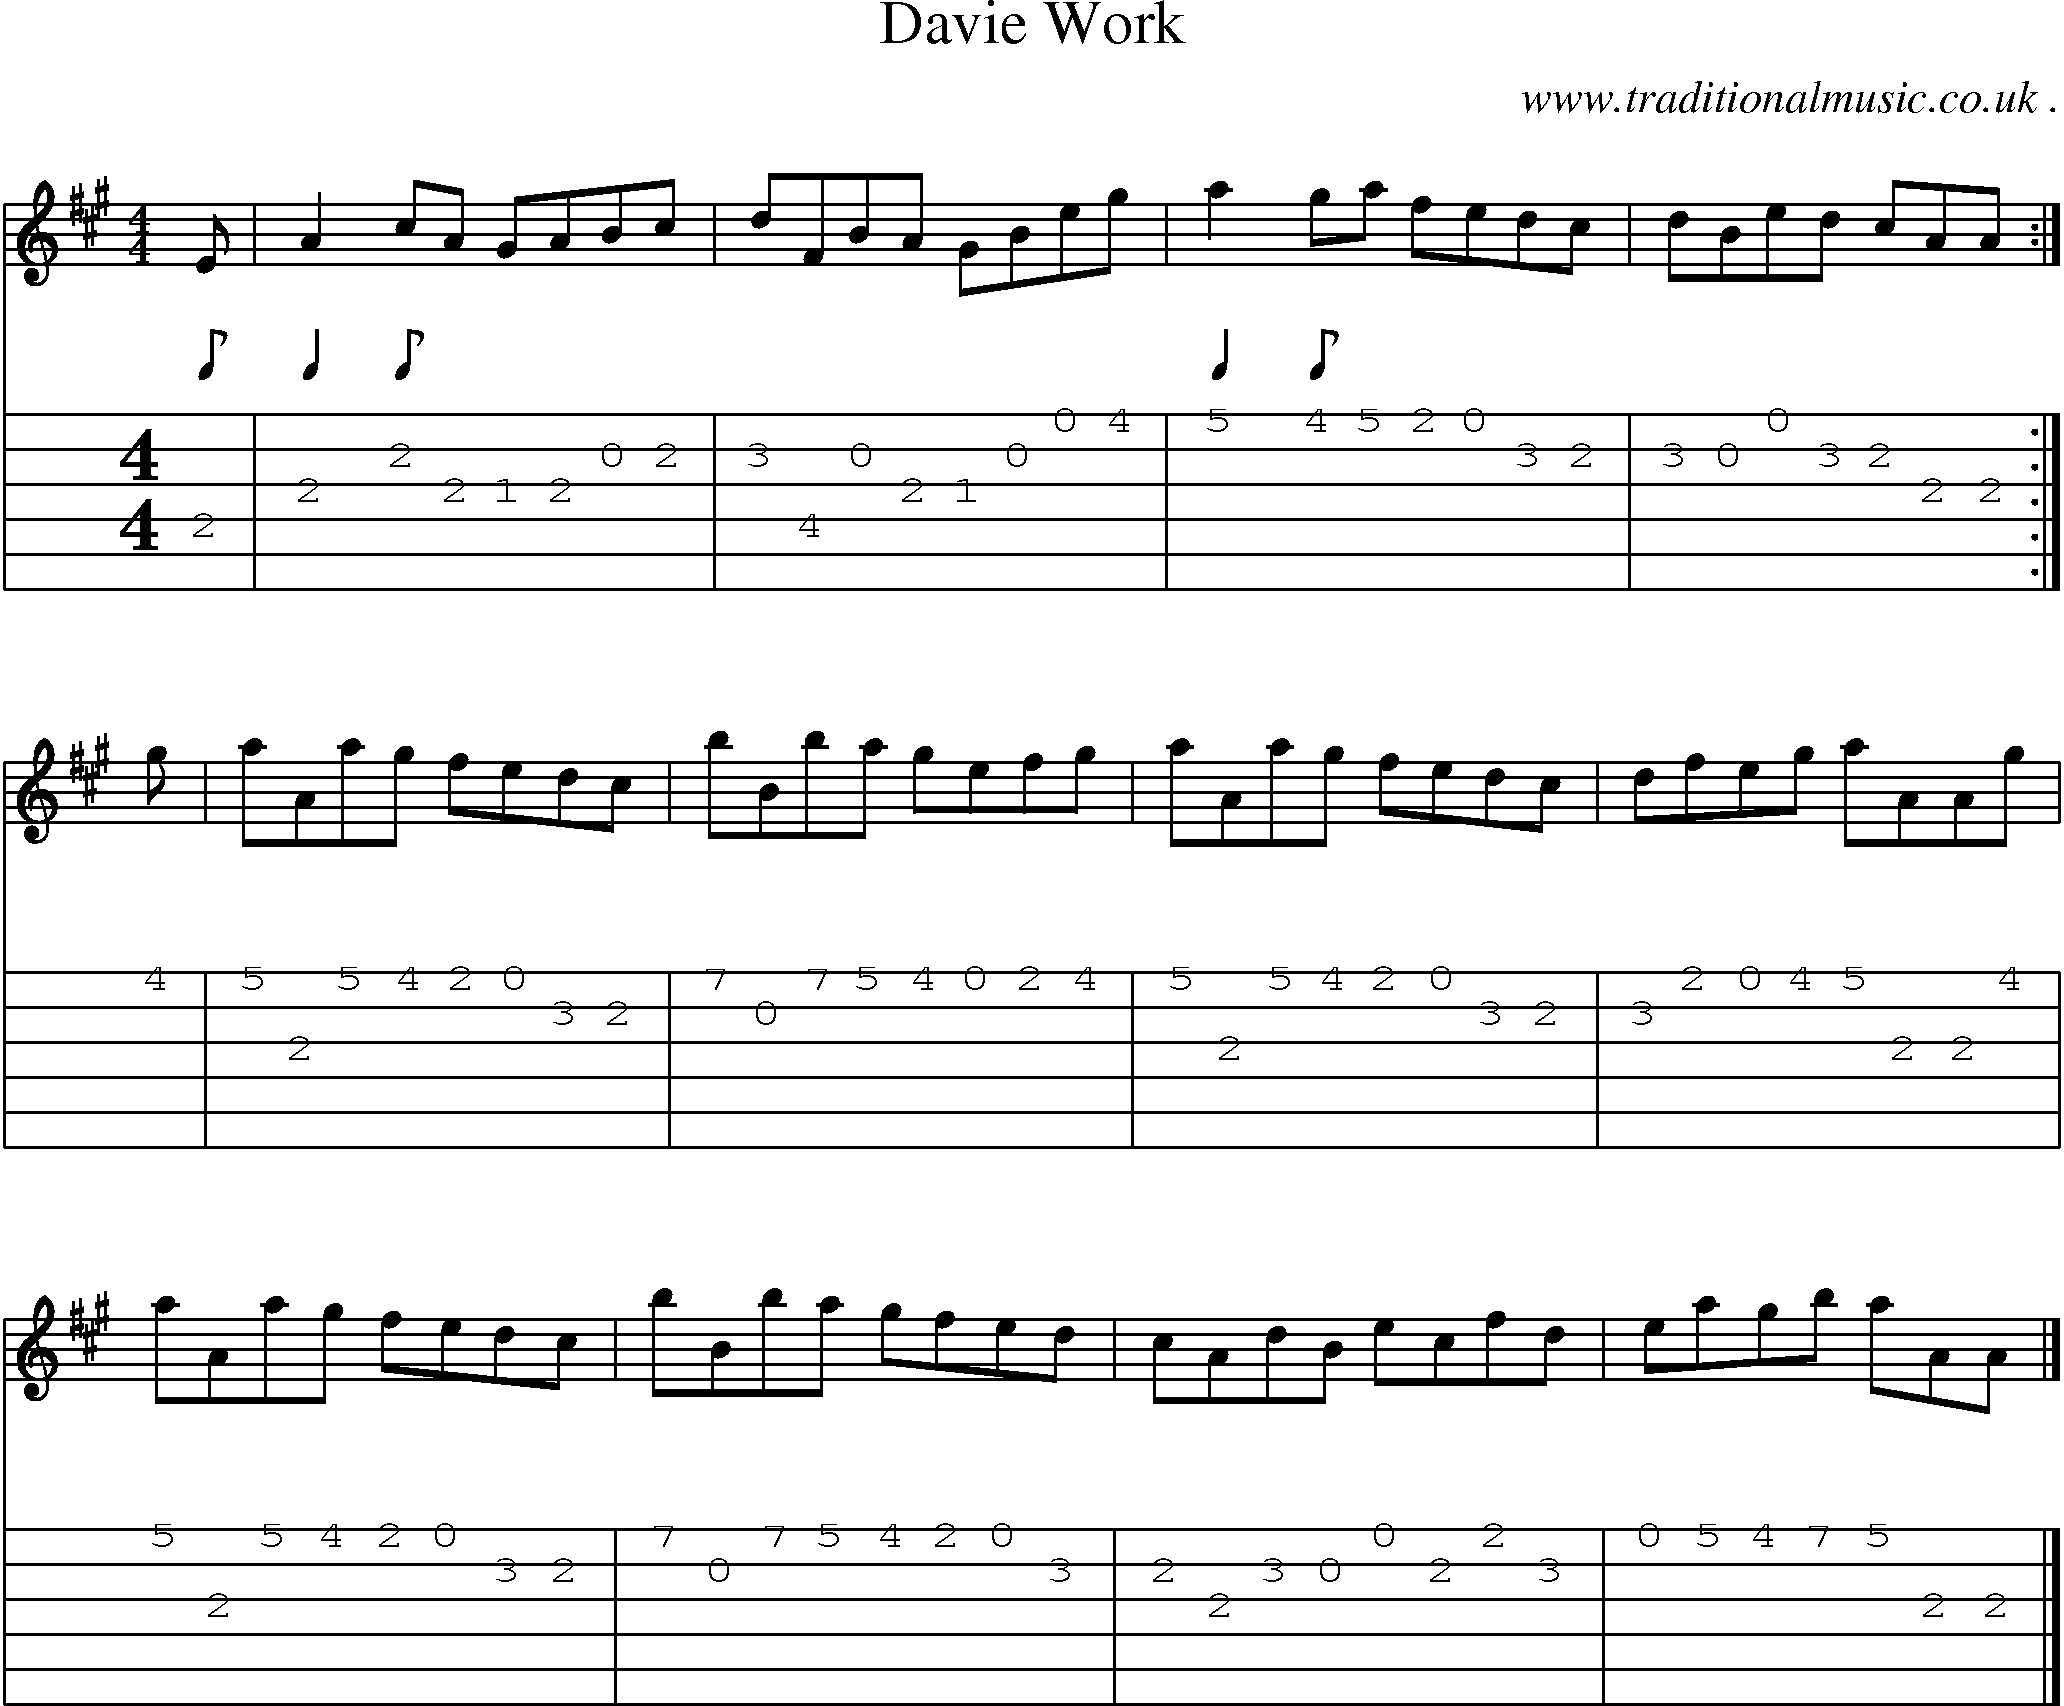 Sheet-music  score, Chords and Guitar Tabs for Davie Work